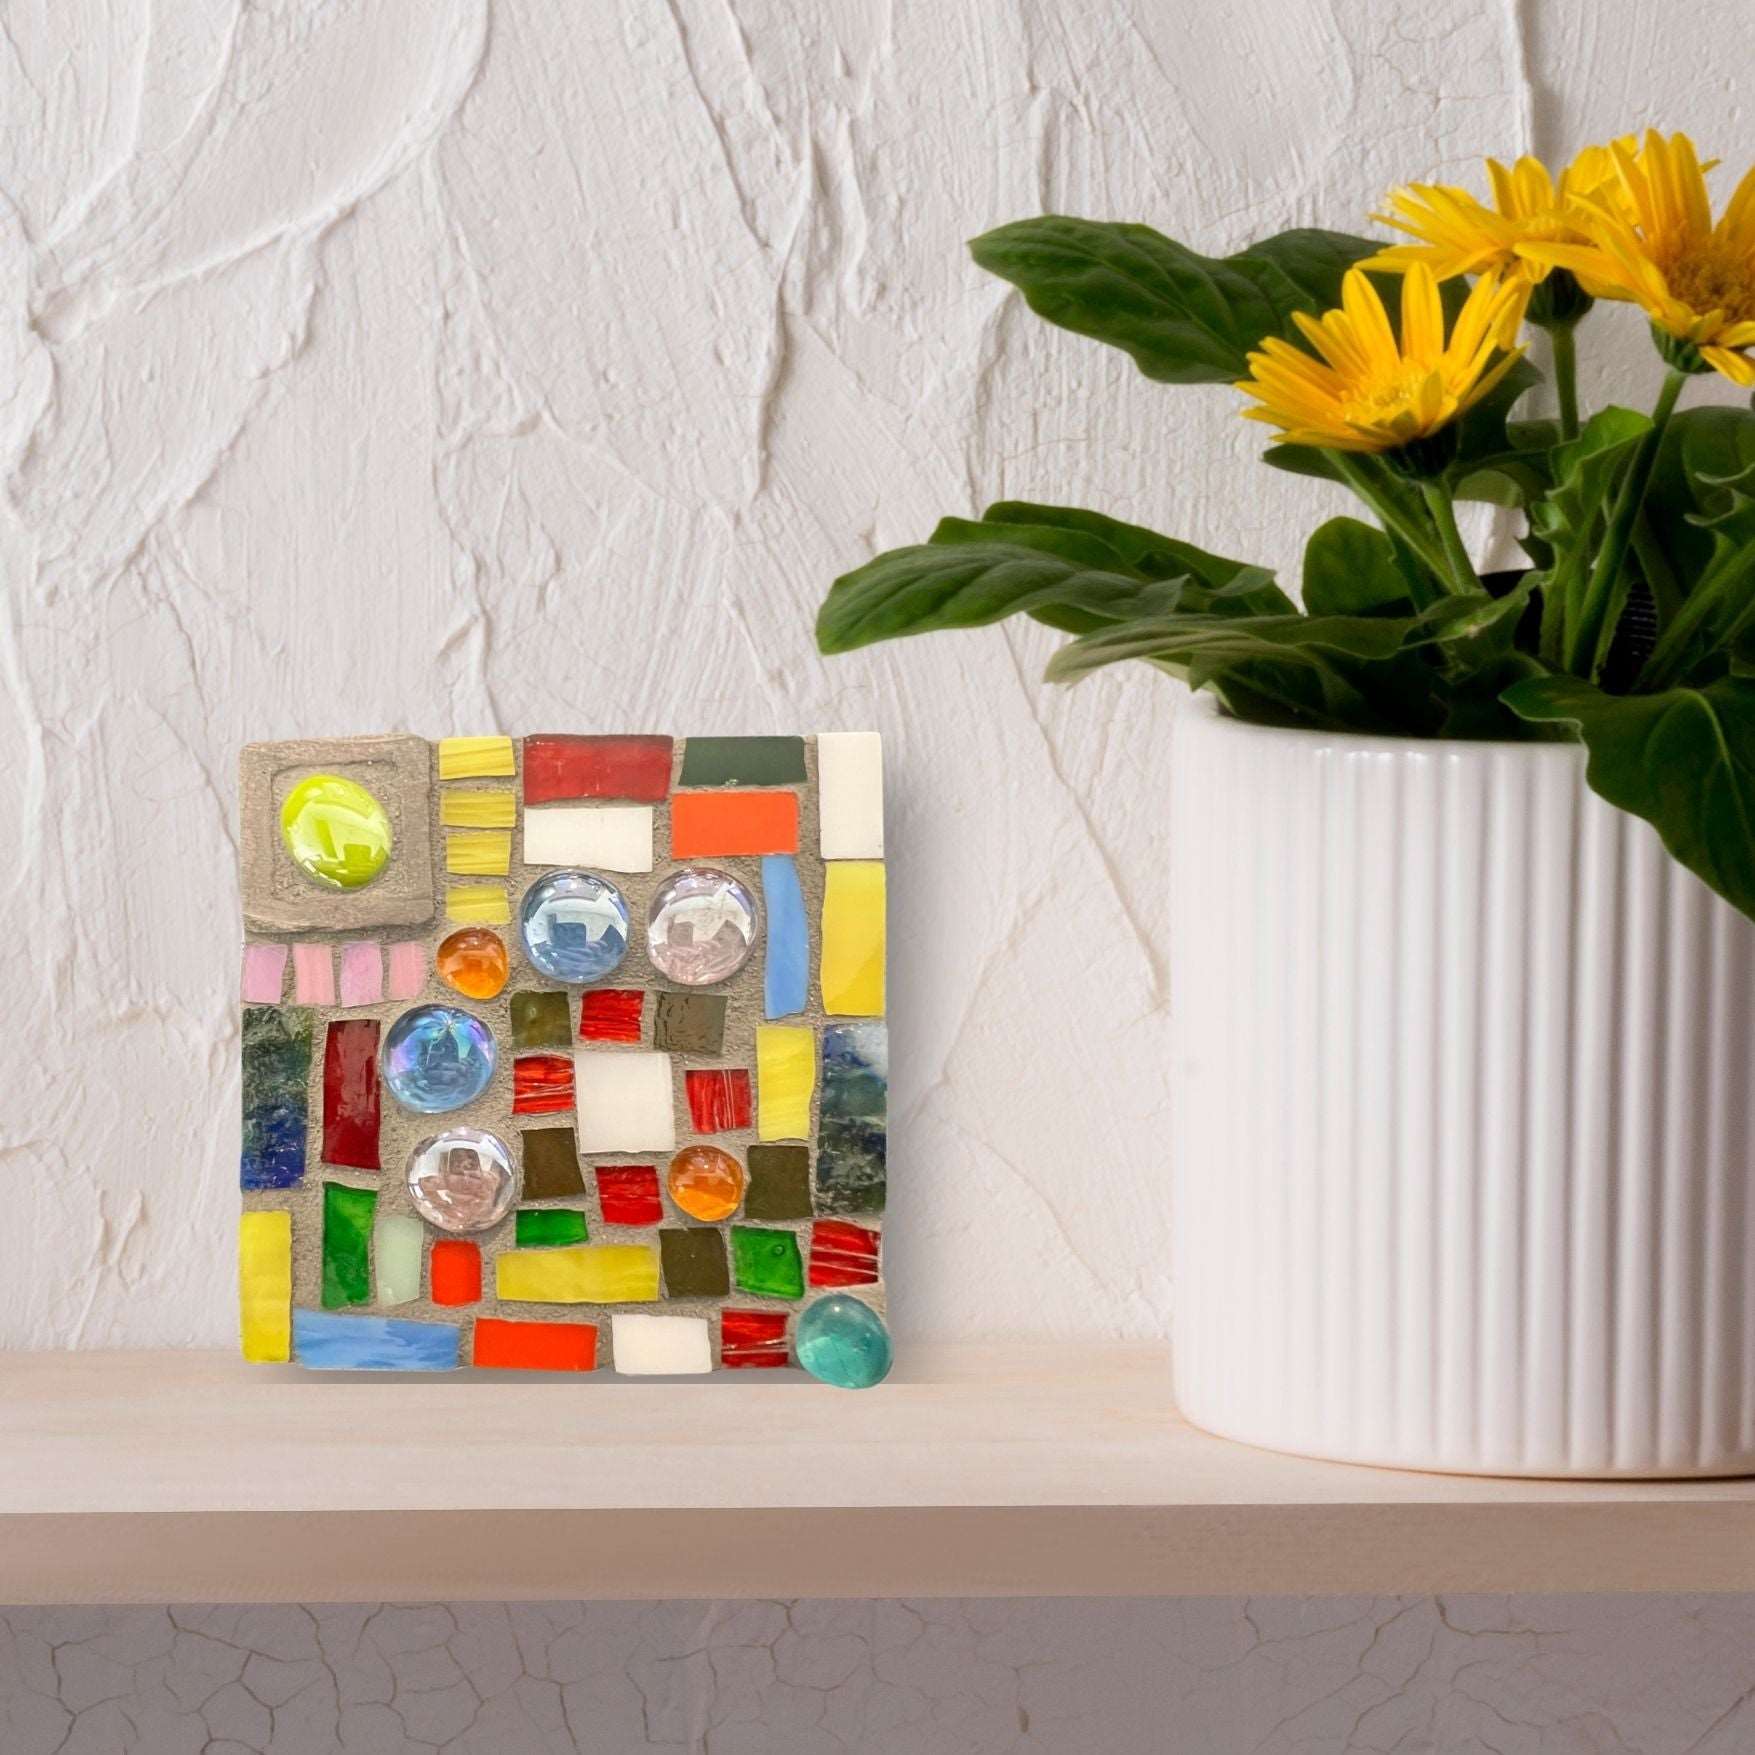 Bright and sunny colored rectangles, squares and circles nestled together to create this mosaic tile.